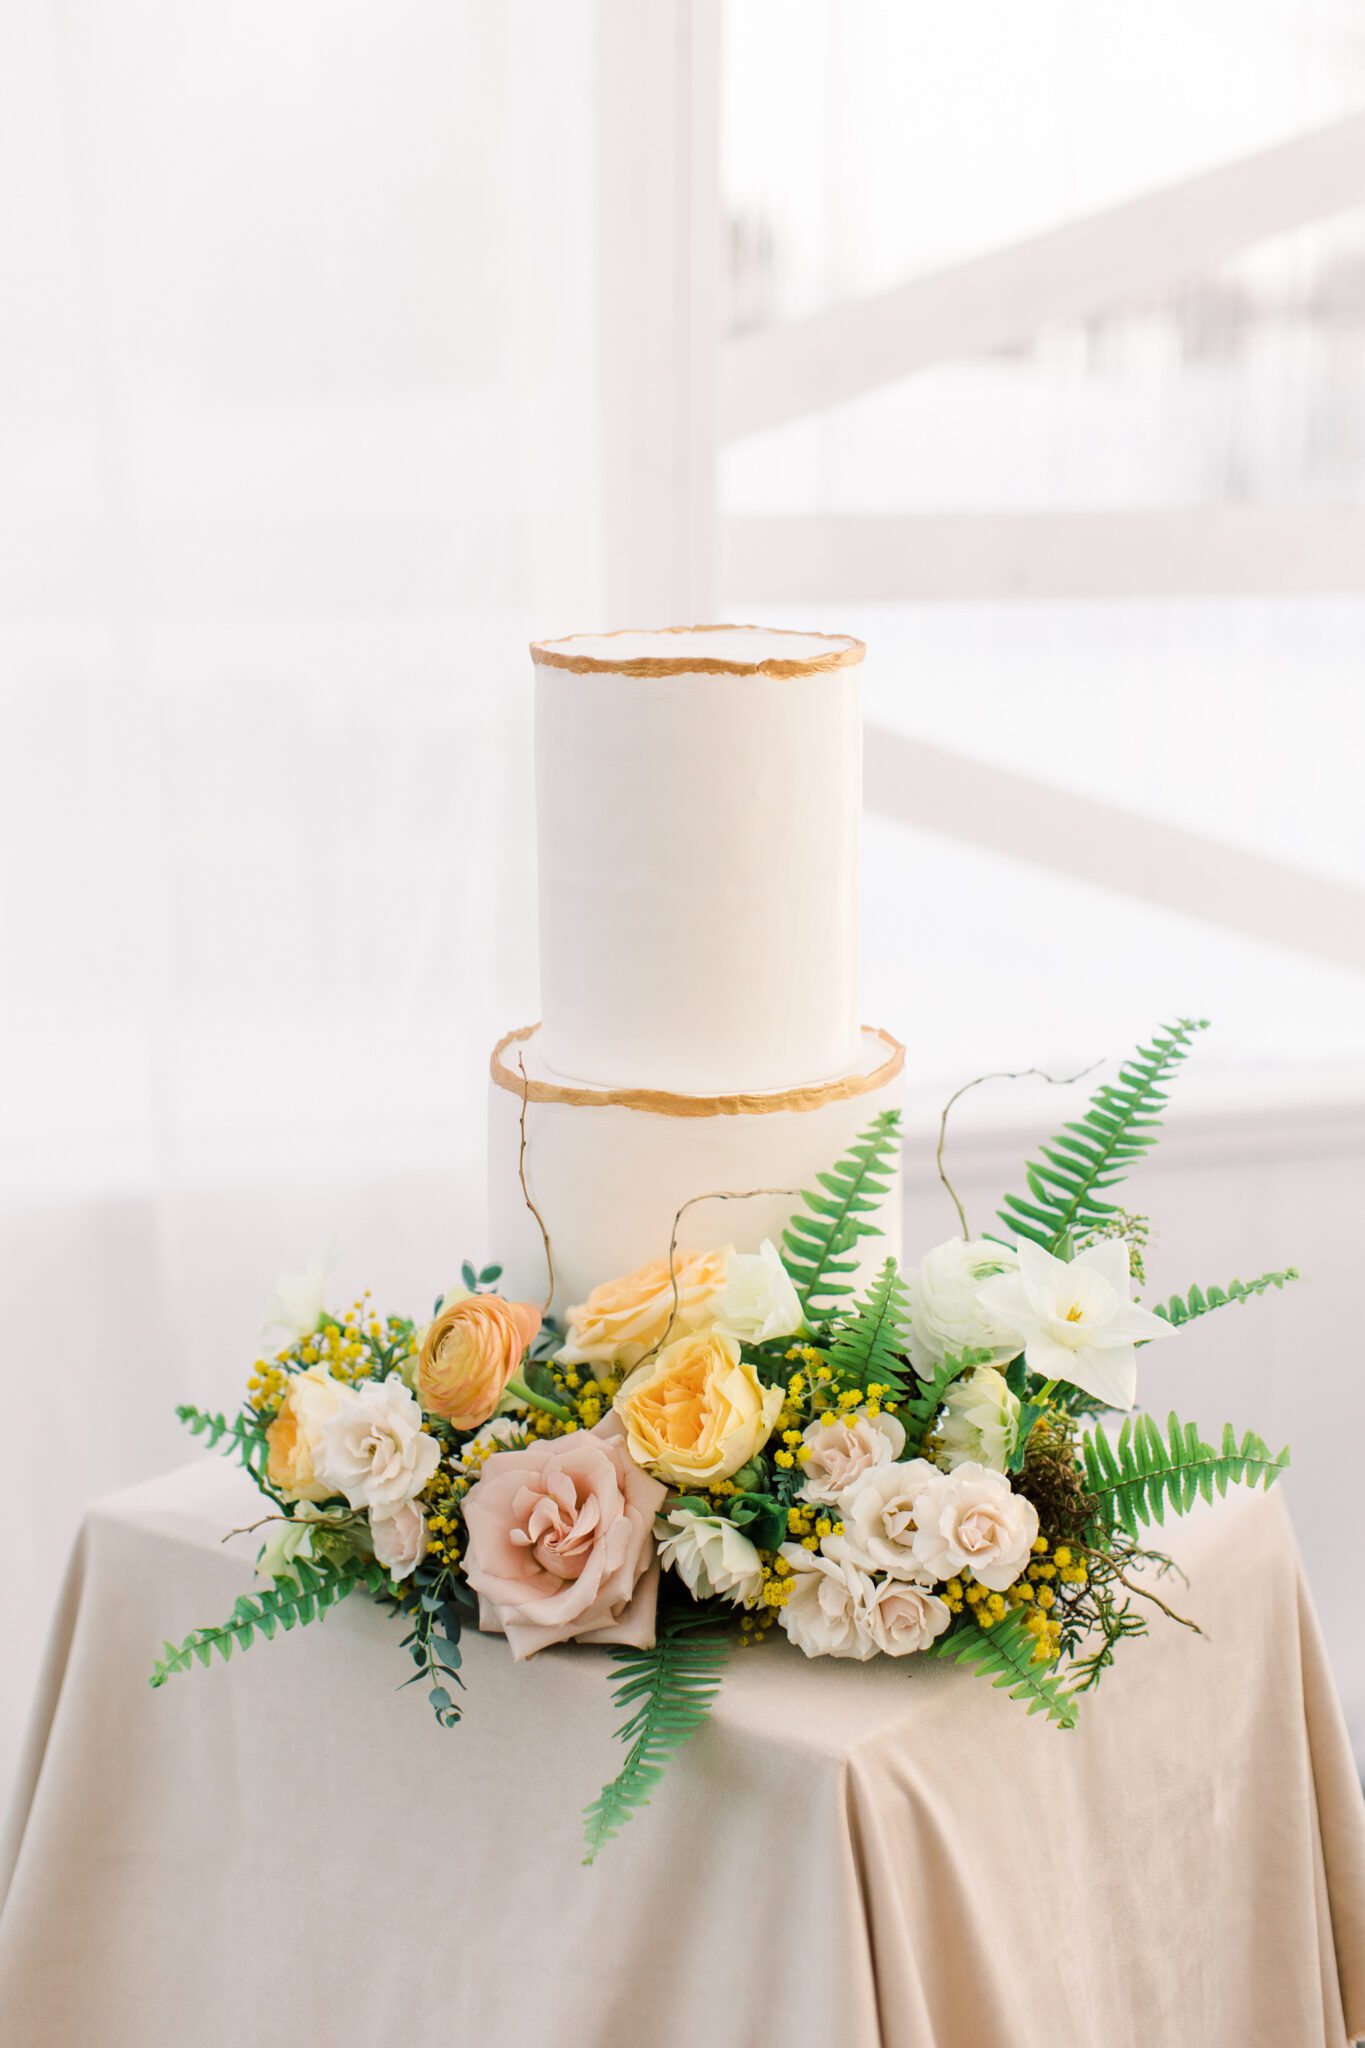 Classic and elegant two-tiered white wedding cake with gold detail by Pink Oven, surrounded by yellow and peach spring florals.